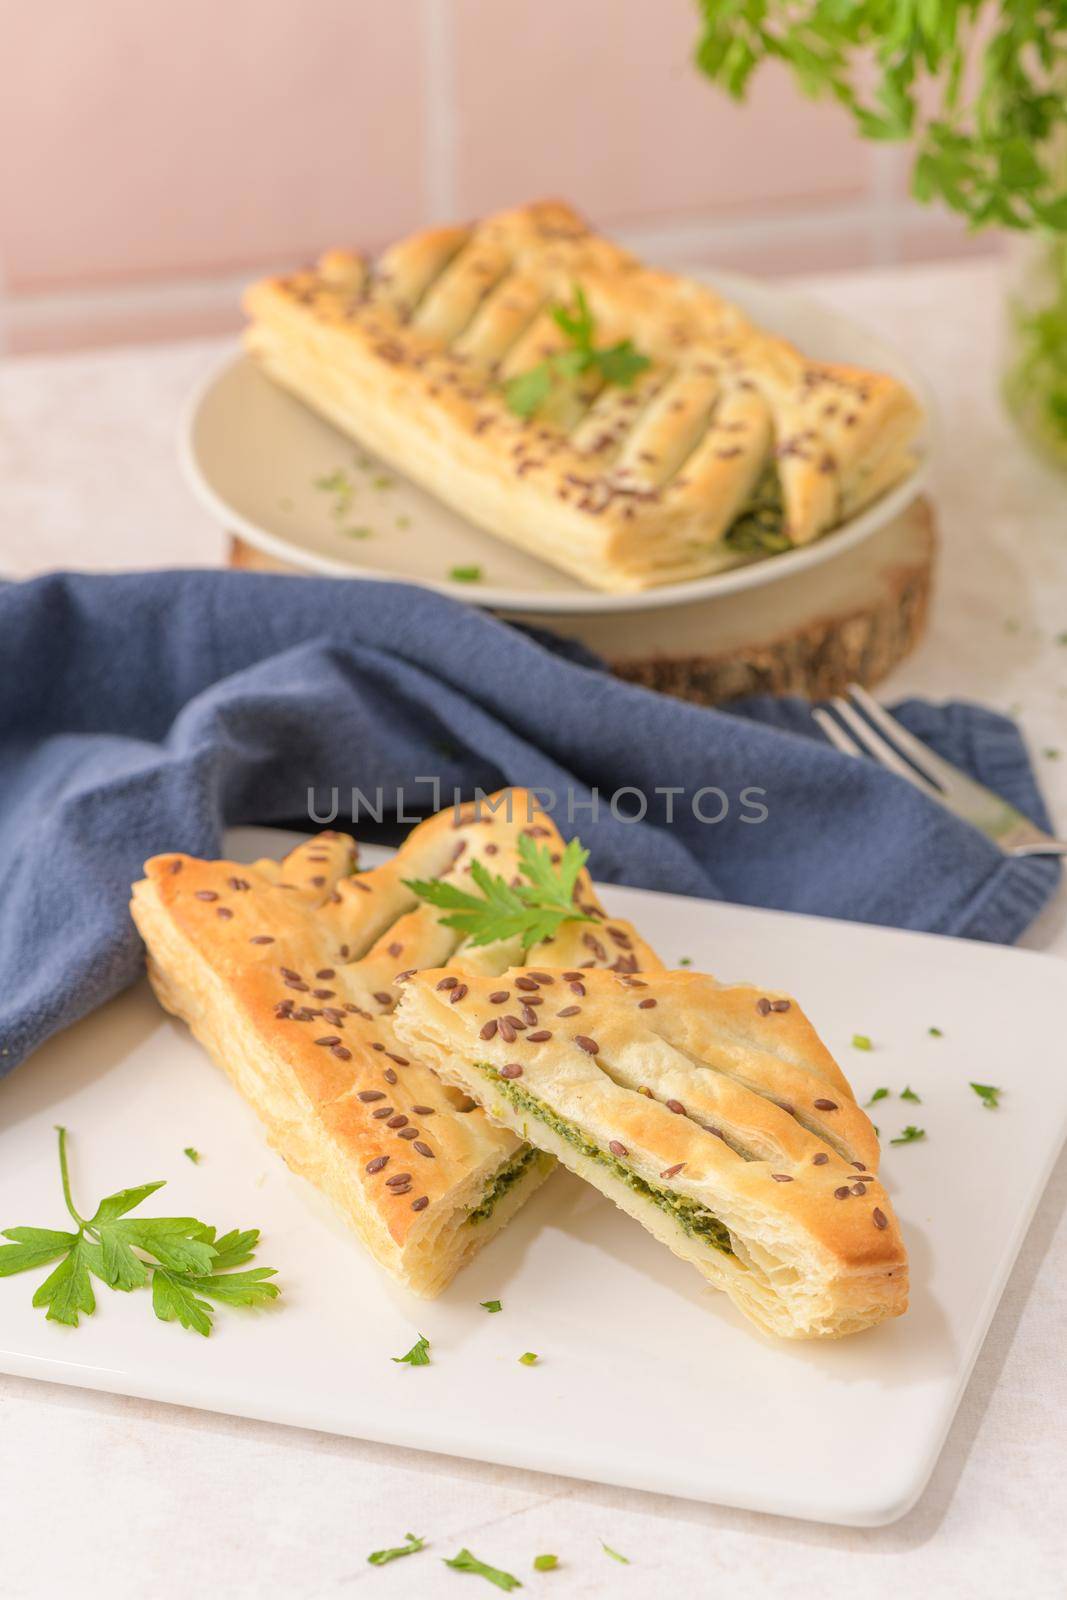 Spinach puff pastry with ricotta cheese and parsley leaves on white ceramic dishes in a kitchen counter top.